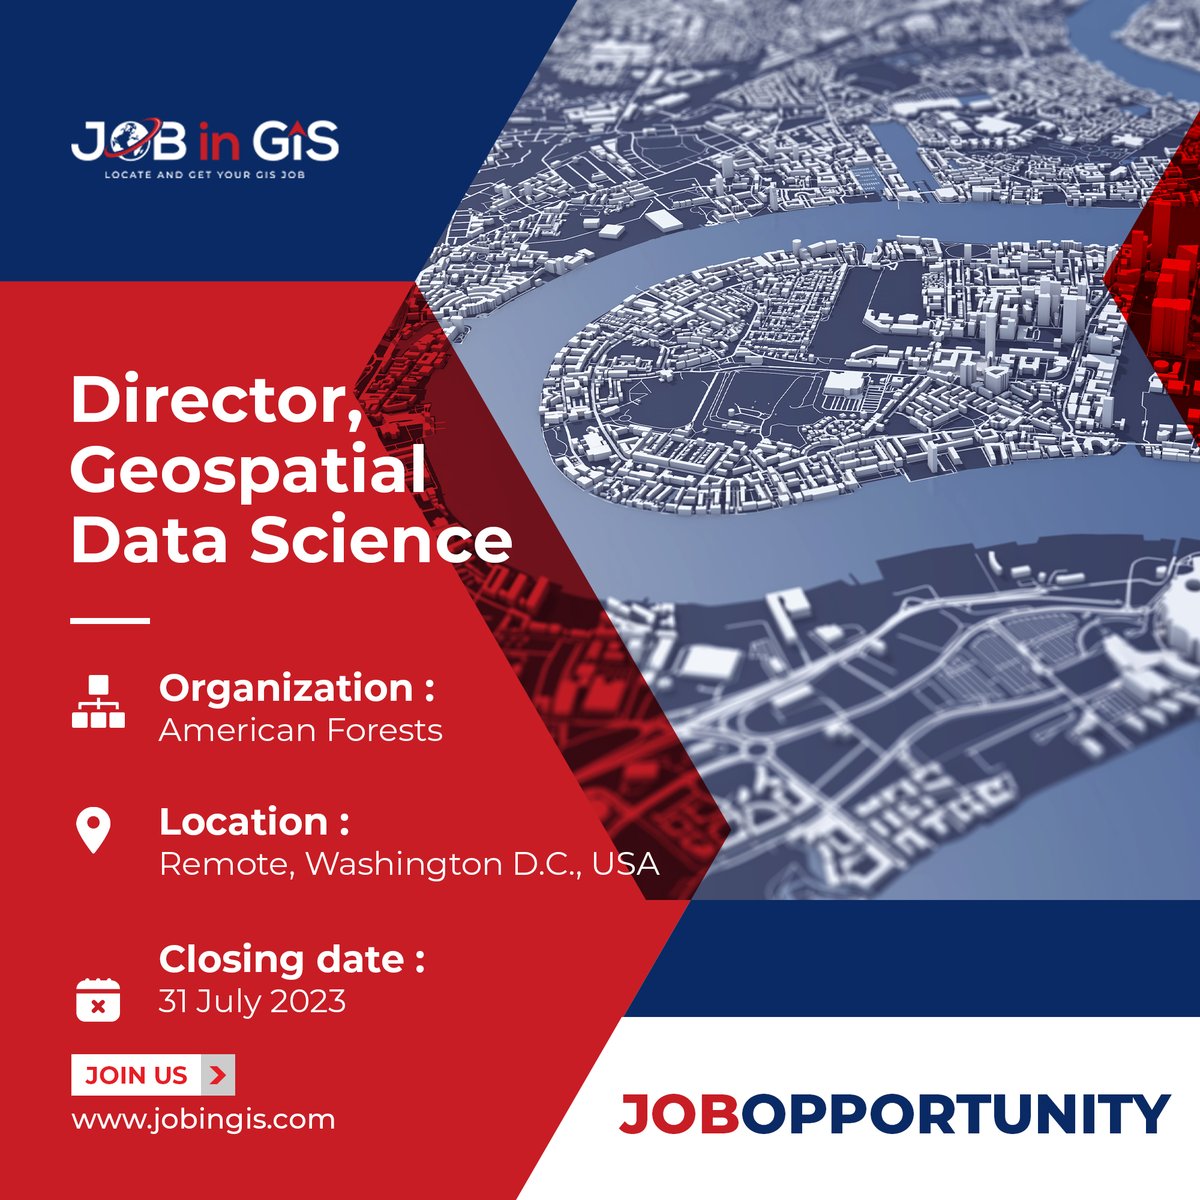 #jobingis : American Forests is hiring a Director, Geospatial Data Science
📍 : #remote #WashingtonDC  #USA 

Apply here 👉 : jobingis.com/jobs/director-…

#Jobs #jobsearch #cartography #Geography #mapping #GIS #geospatial #remotesensing #gisjobs #gischat